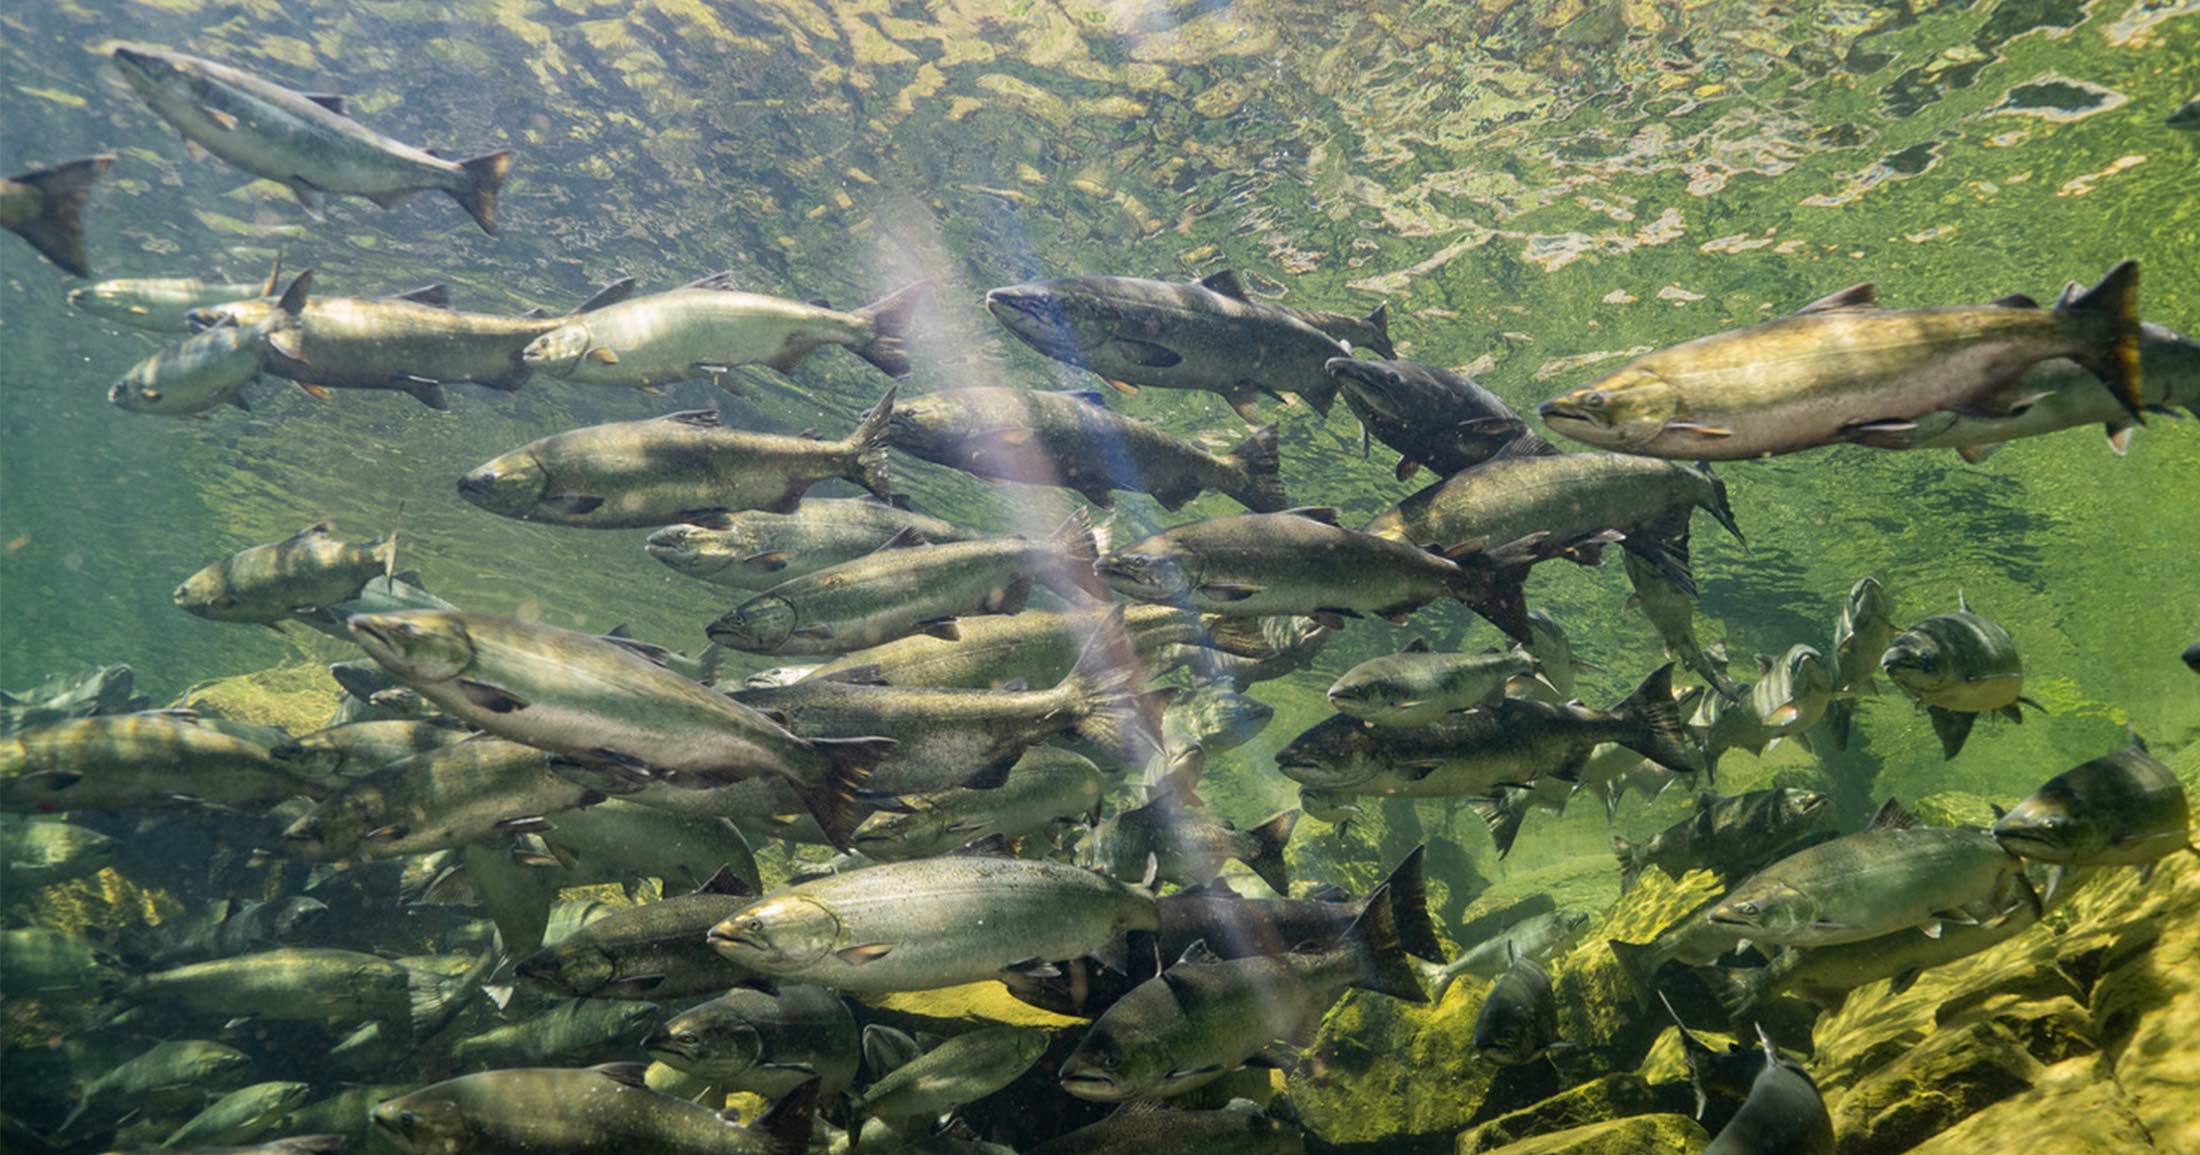 Underwater view of a school of Chinook salmon swimming.